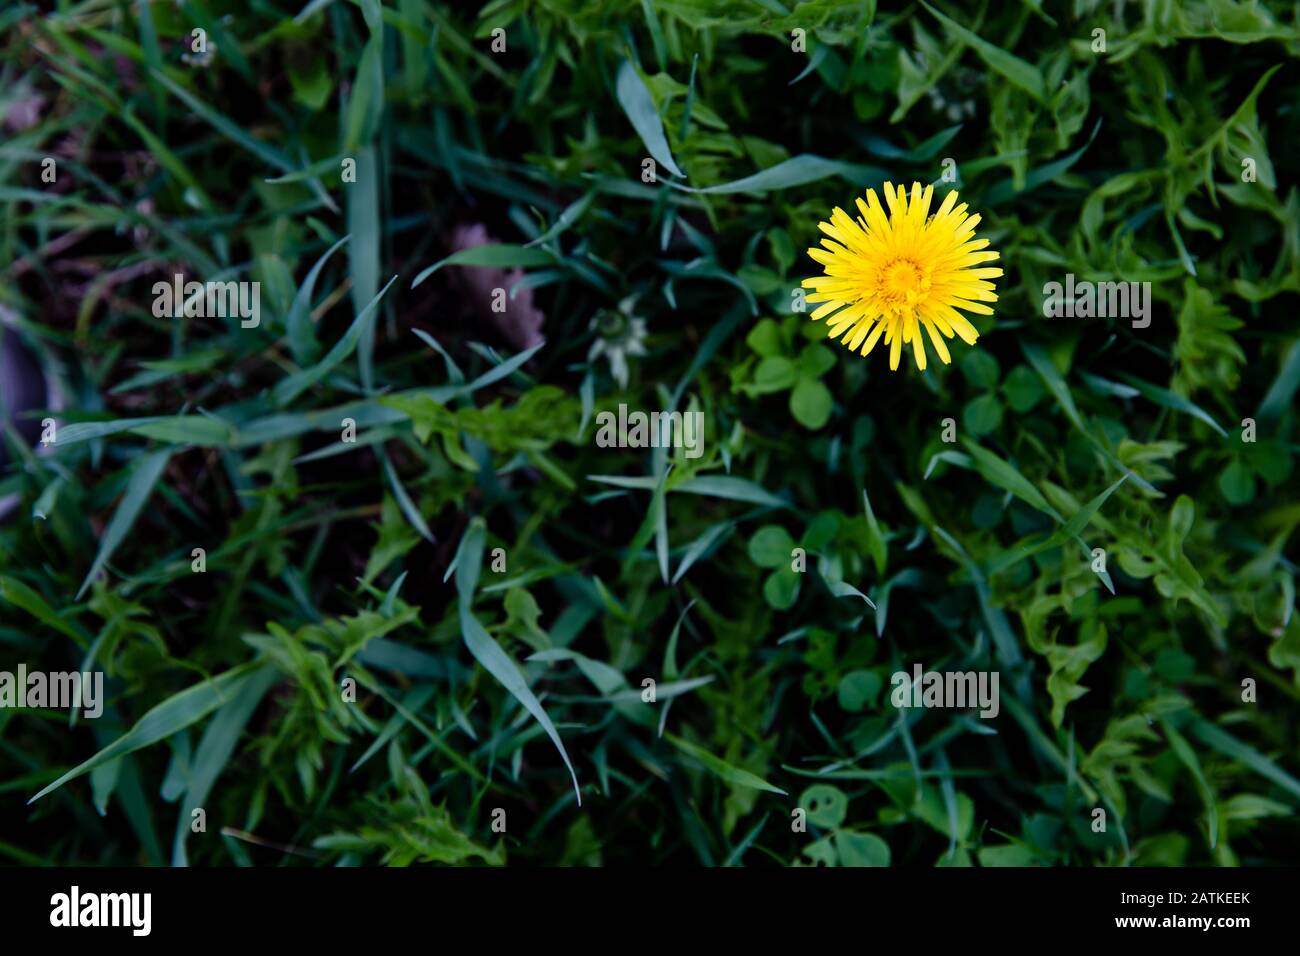 Landscape picture of grass and a single dandelion in right corner, room for text Stock Photo